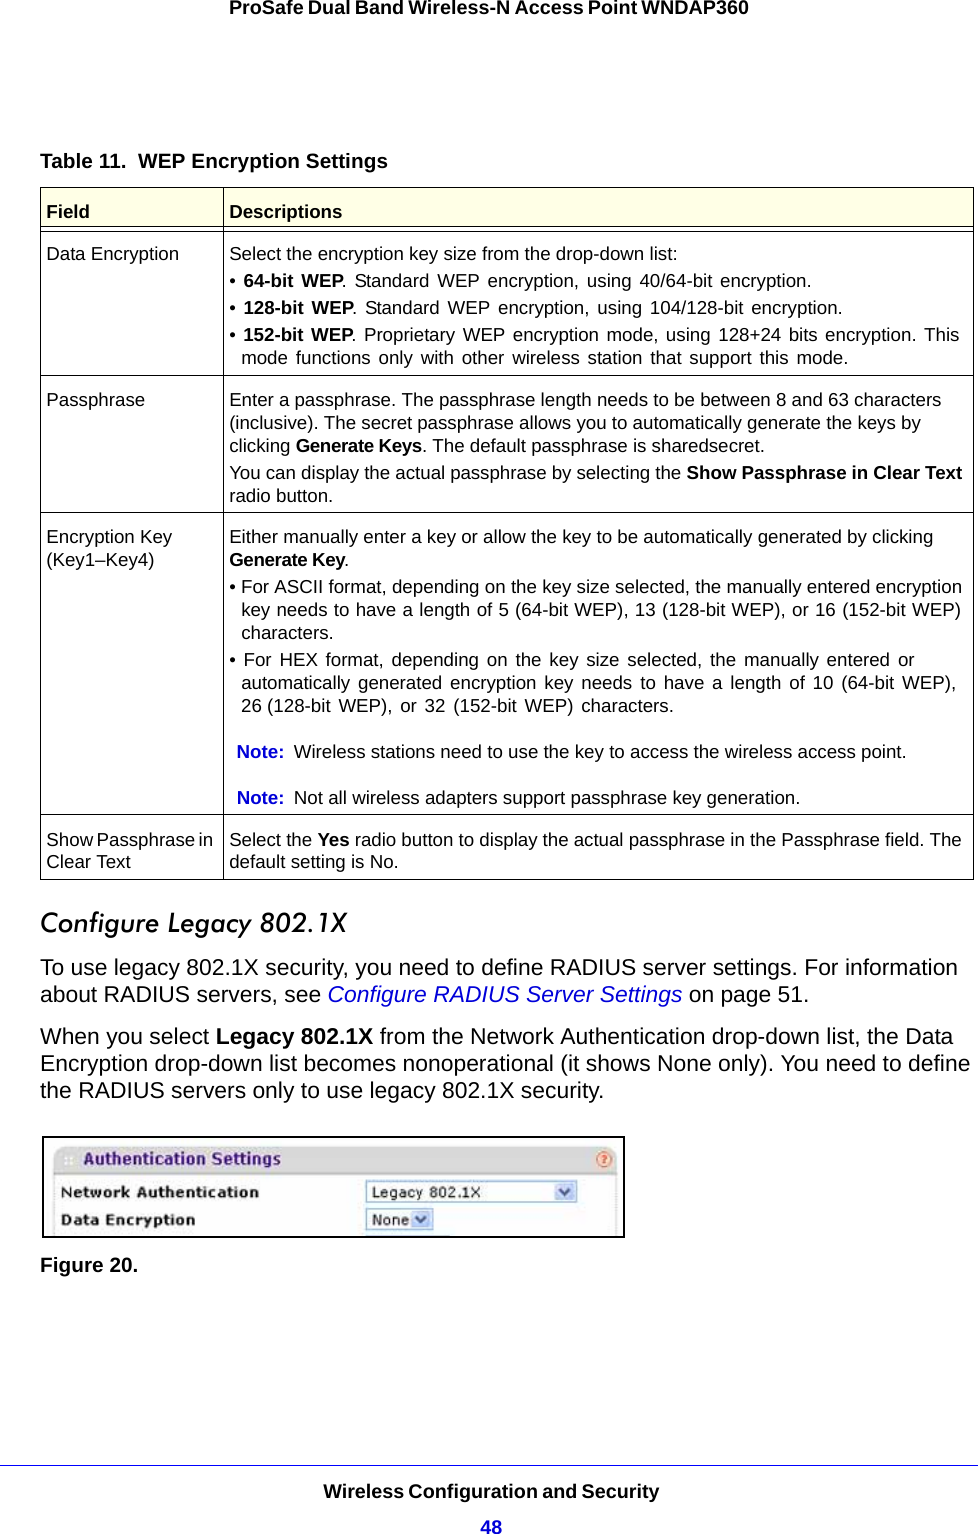 Wireless Configuration and Security48ProSafe Dual Band Wireless-N Access Point WNDAP360 Configure Legacy 802.1XTo use legacy 802.1X security, you need to define RADIUS server settings. For information about RADIUS servers, see Configure RADIUS Server Settings on page 51.When you select Legacy 802.1X from the Network Authentication drop-down list, the Data Encryption drop-down list becomes nonoperational (it shows None only). You need to define the RADIUS servers only to use legacy 802.1X security.Figure 20. Table 11.  WEP Encryption Settings Field DescriptionsData Encryption Select the encryption key size from the drop-down list:• 64-bit WEP. Standard WEP encryption, using 40/64-bit encryption.• 128-bit WEP. Standard WEP encryption, using 104/128-bit encryption.• 152-bit WEP. Proprietary WEP encryption mode, using 128+24 bits encryption. This mode functions only with other wireless station that support this mode.Passphrase Enter a passphrase. The passphrase length needs to be between 8 and 63 characters (inclusive). The secret passphrase allows you to automatically generate the keys by clicking Generate Keys. The default passphrase is sharedsecret.You can display the actual passphrase by selecting the Show Passphrase in Clear Text radio button. Encryption Key (Key1–Key4)Either manually enter a key or allow the key to be automatically generated by clicking Generate Key.• For ASCII format, depending on the key size selected, the manually entered encryption key needs to have a length of 5 (64-bit WEP), 13 (128-bit WEP), or 16 (152-bit WEP) characters.• For HEX format, depending on the key size selected, the manually entered or automatically generated encryption key needs to have a length of 10 (64-bit WEP), 26 (128-bit WEP), or 32 (152-bit WEP) characters.Note: Wireless stations need to use the key to access the wireless access point.Note: Not all wireless adapters support passphrase key generation.Show Passphrase in Clear TextSelect the Yes radio button to display the actual passphrase in the Passphrase field. The default setting is No.